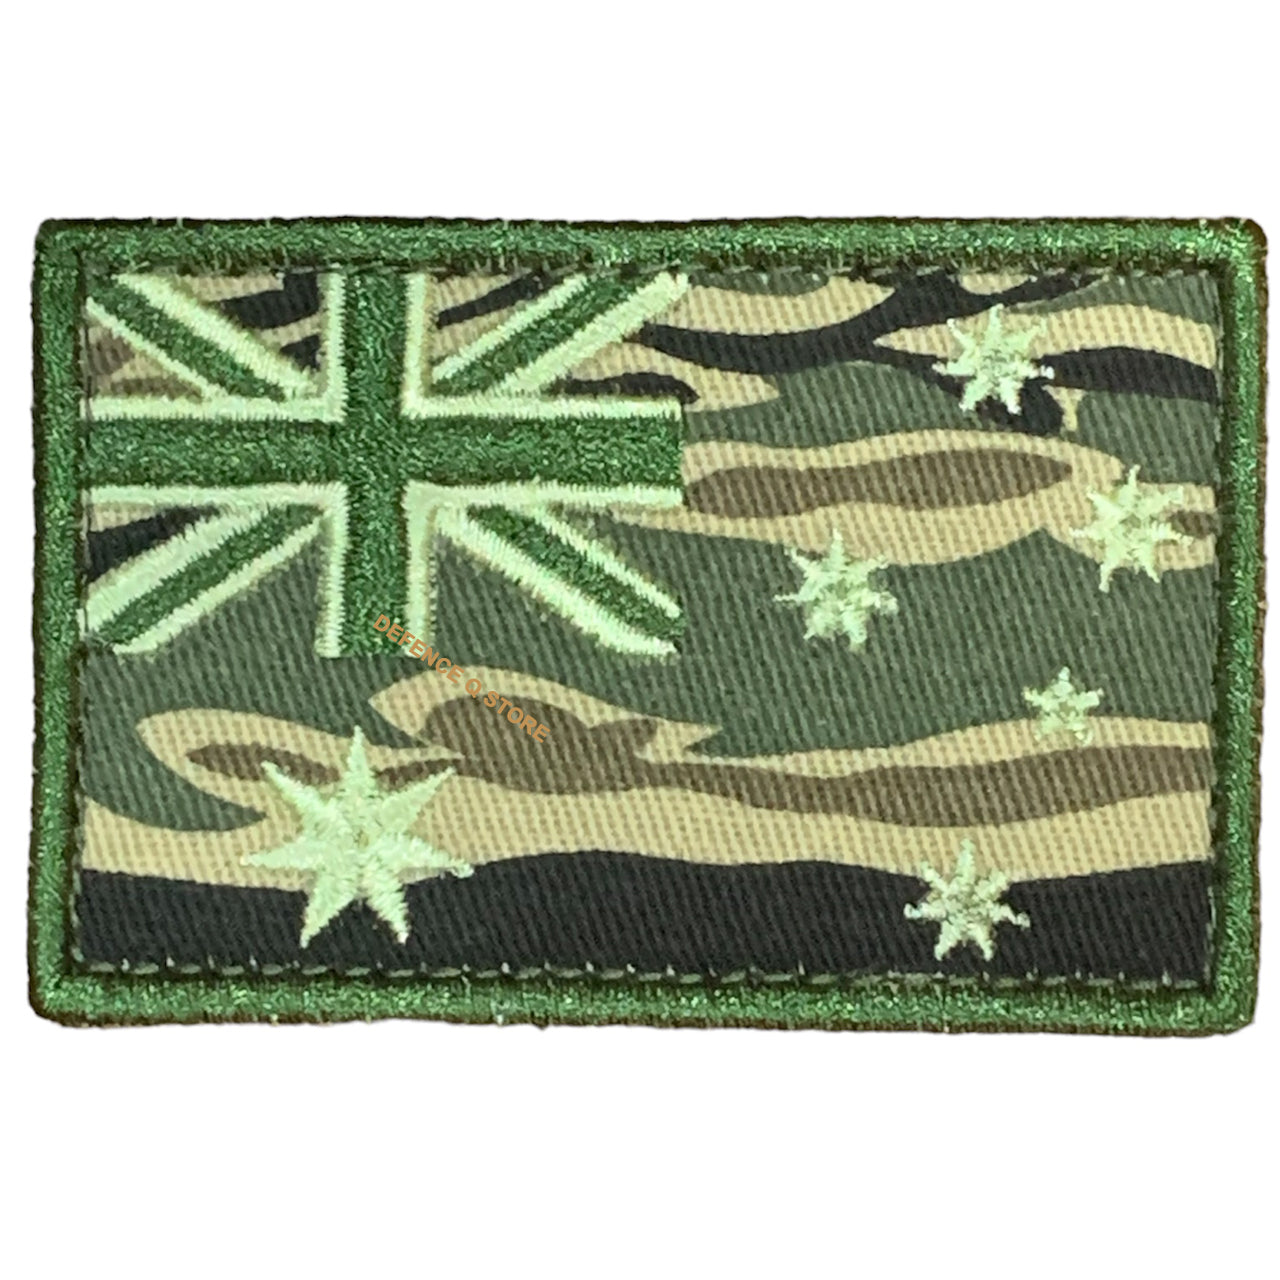 Add a touch of charm to your attire with this Australian Flag Tarer Camouflage Embroidery Velcro Backed Patch. Measuring 5cm X 7cm, it is the perfect addition to your jacket, pack or cap. Show your love for your country in a stylish and patriotic way! www.defenceqstore.com.au